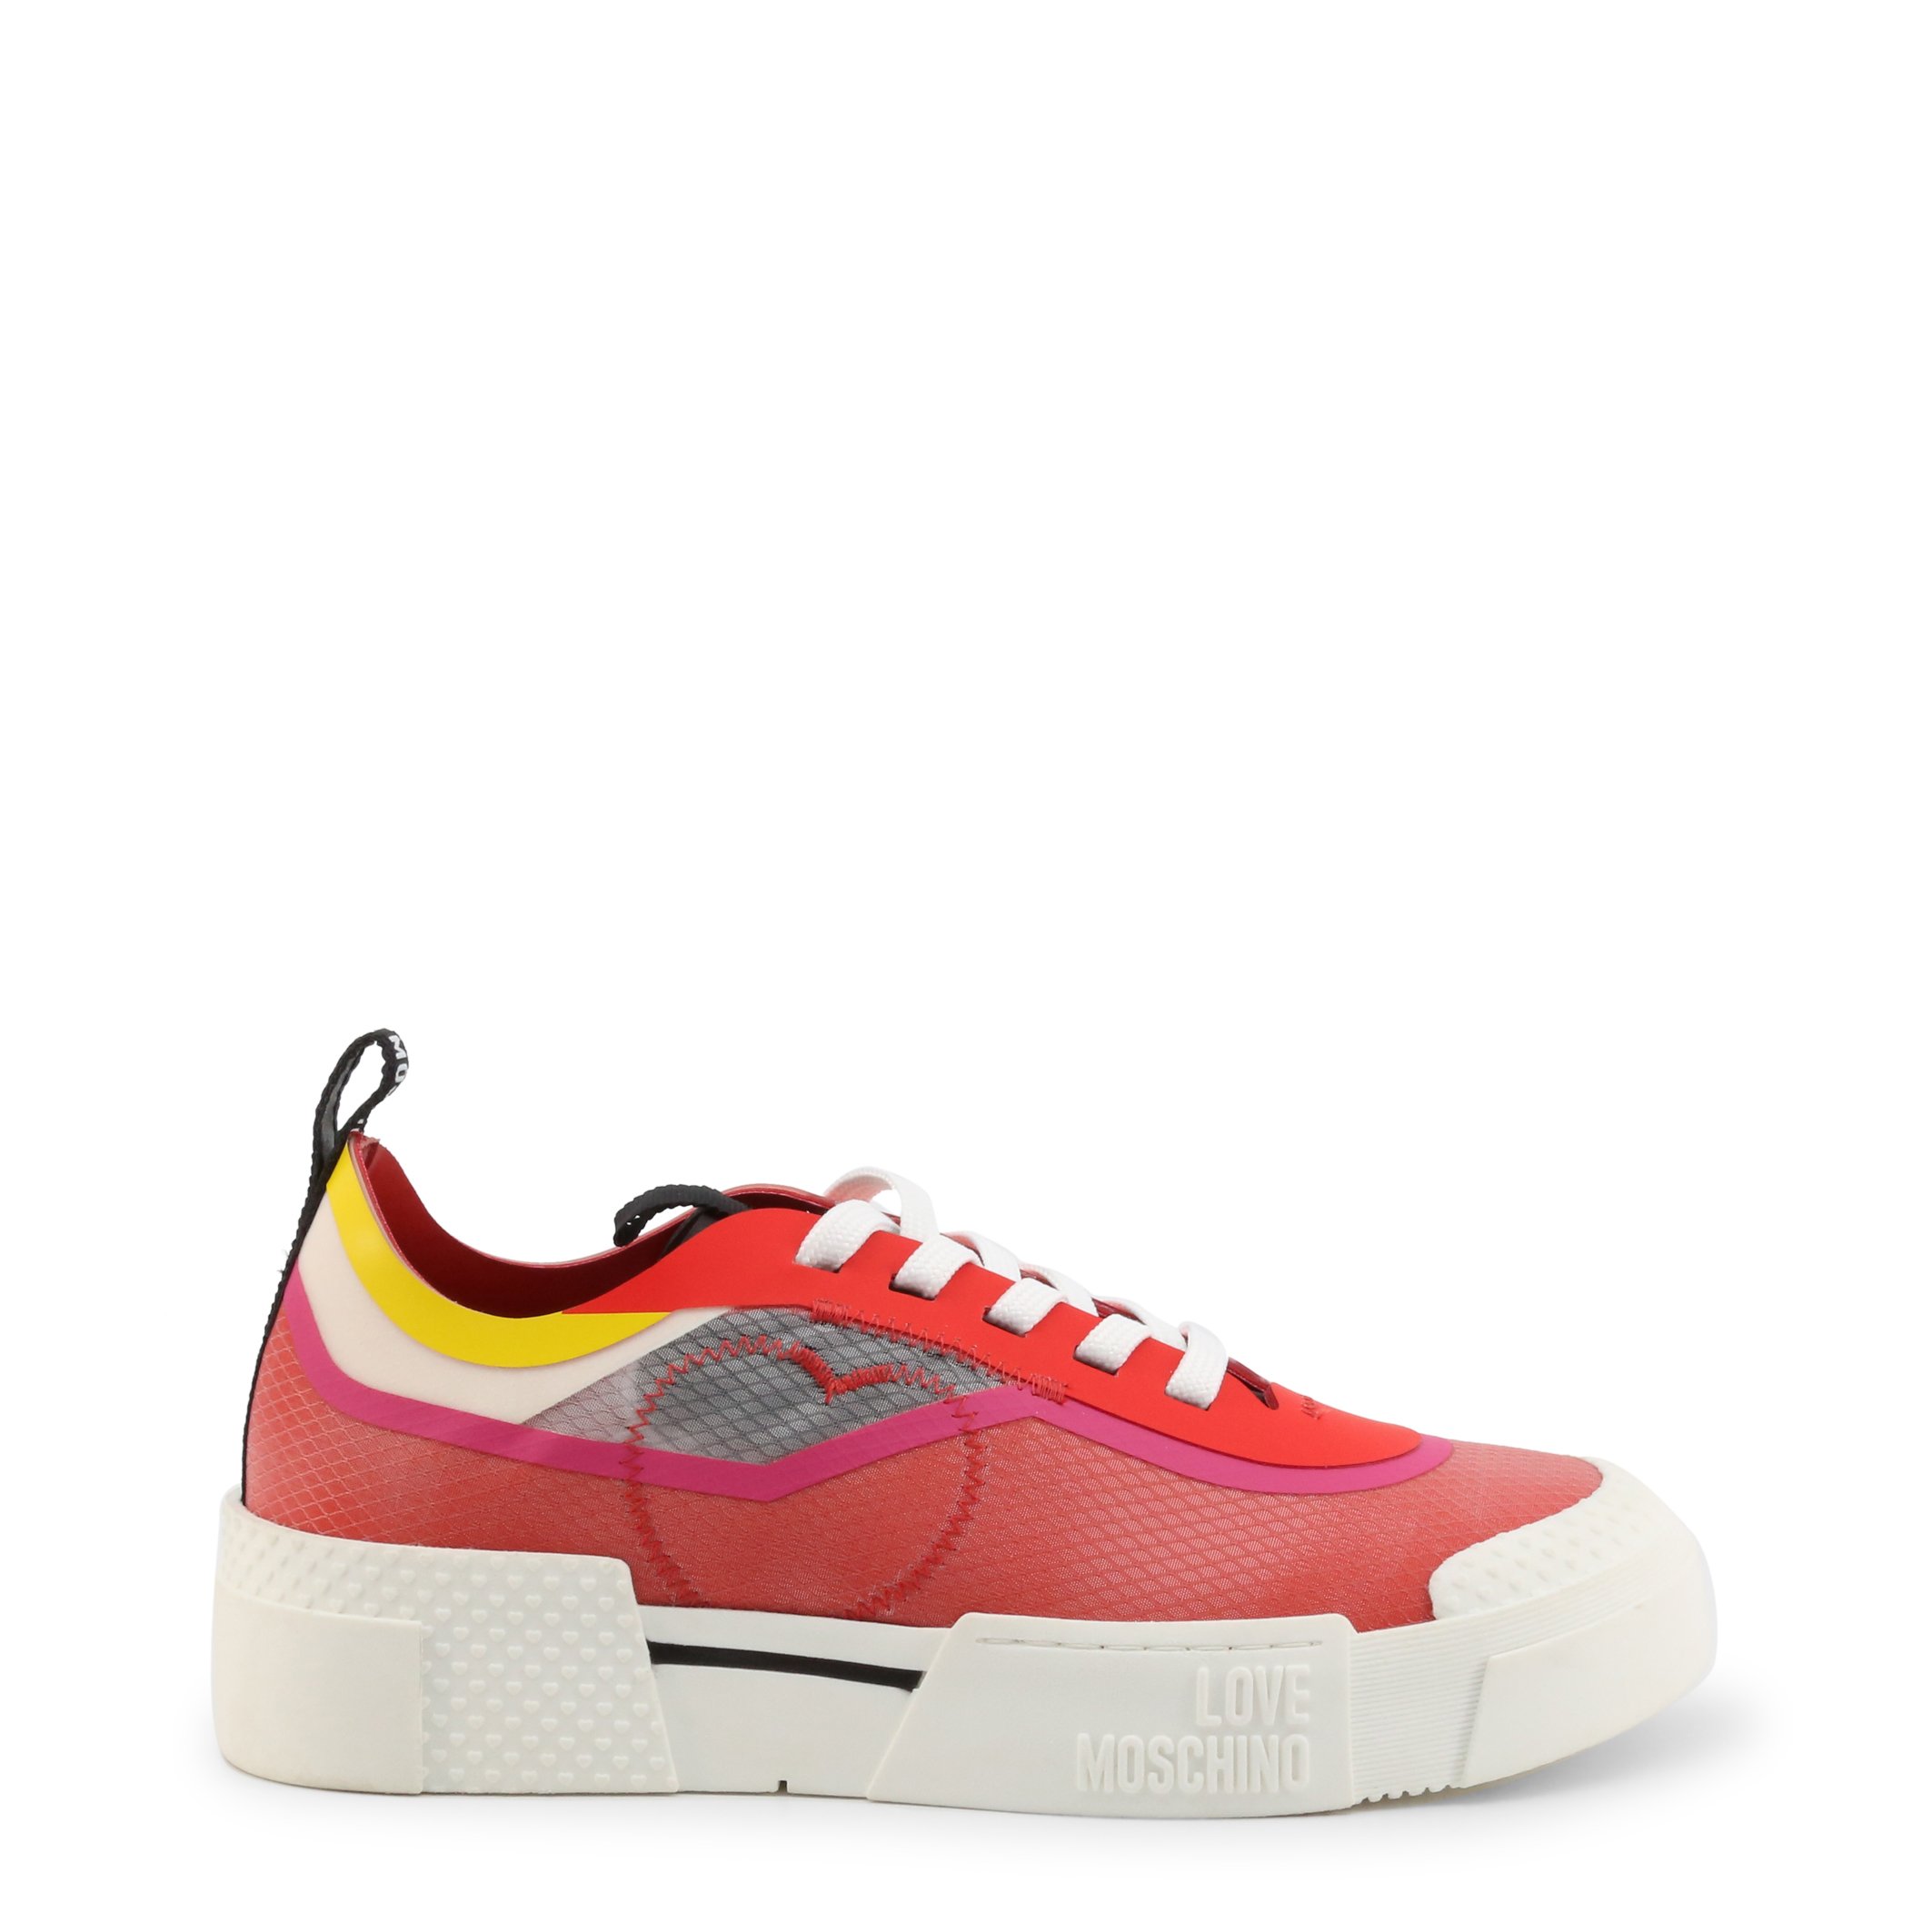 Love Moschino Women's Trainer Various Colours JA15435G0CJR1 - red EU 36